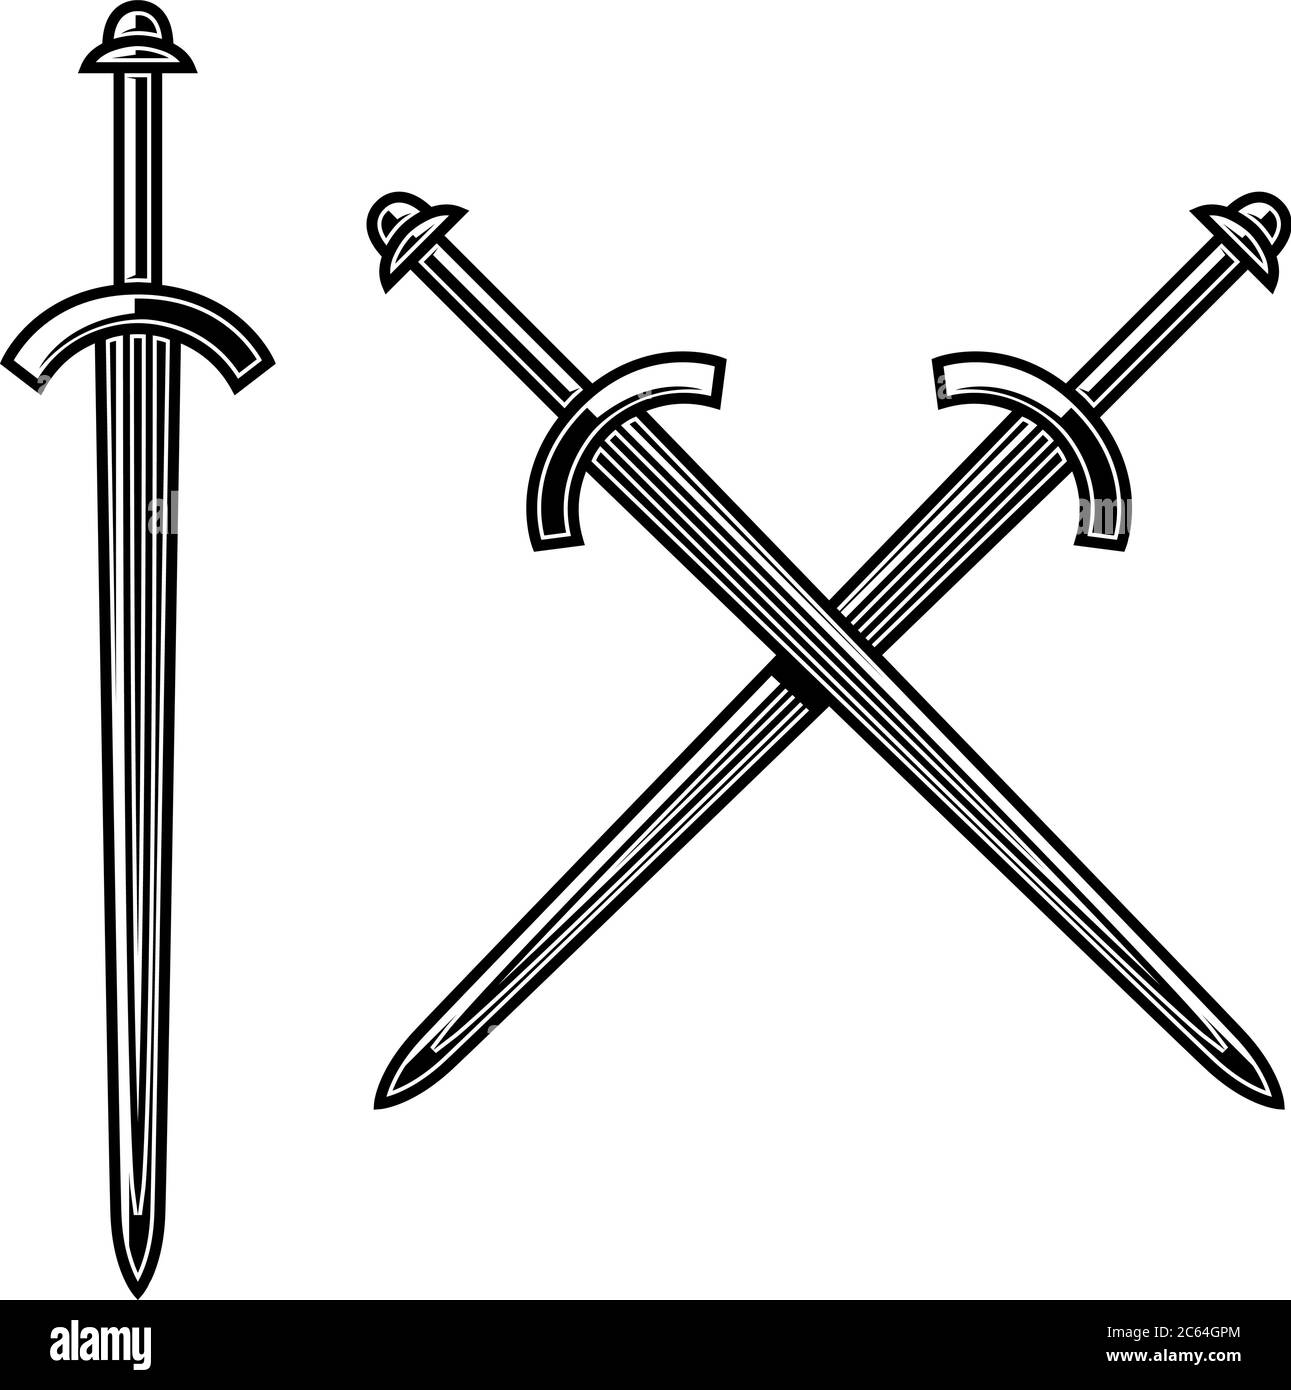 Illustration of crossed knight swords in engraving style. Design ...